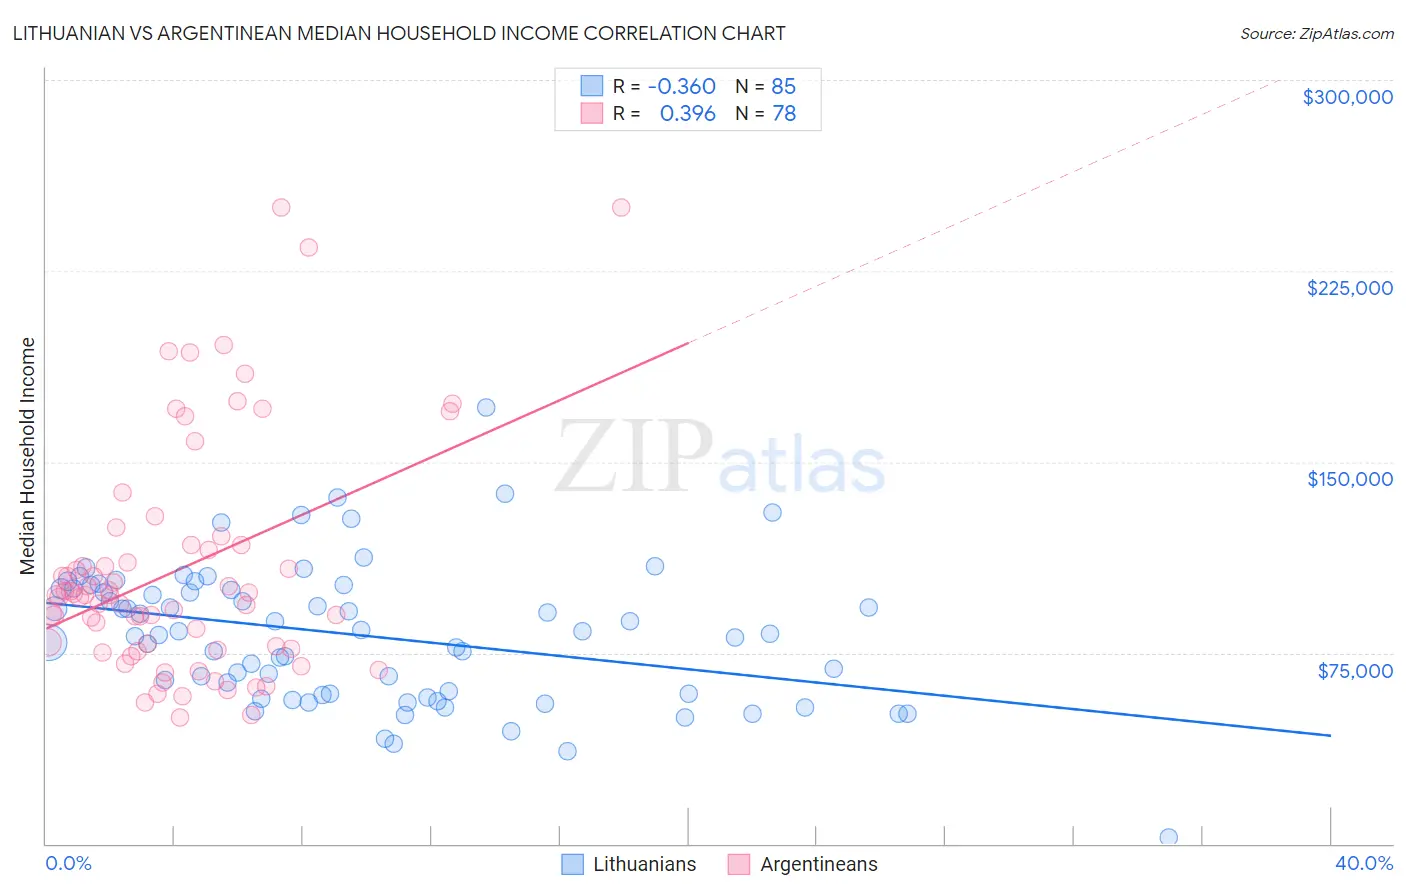 Lithuanian vs Argentinean Median Household Income